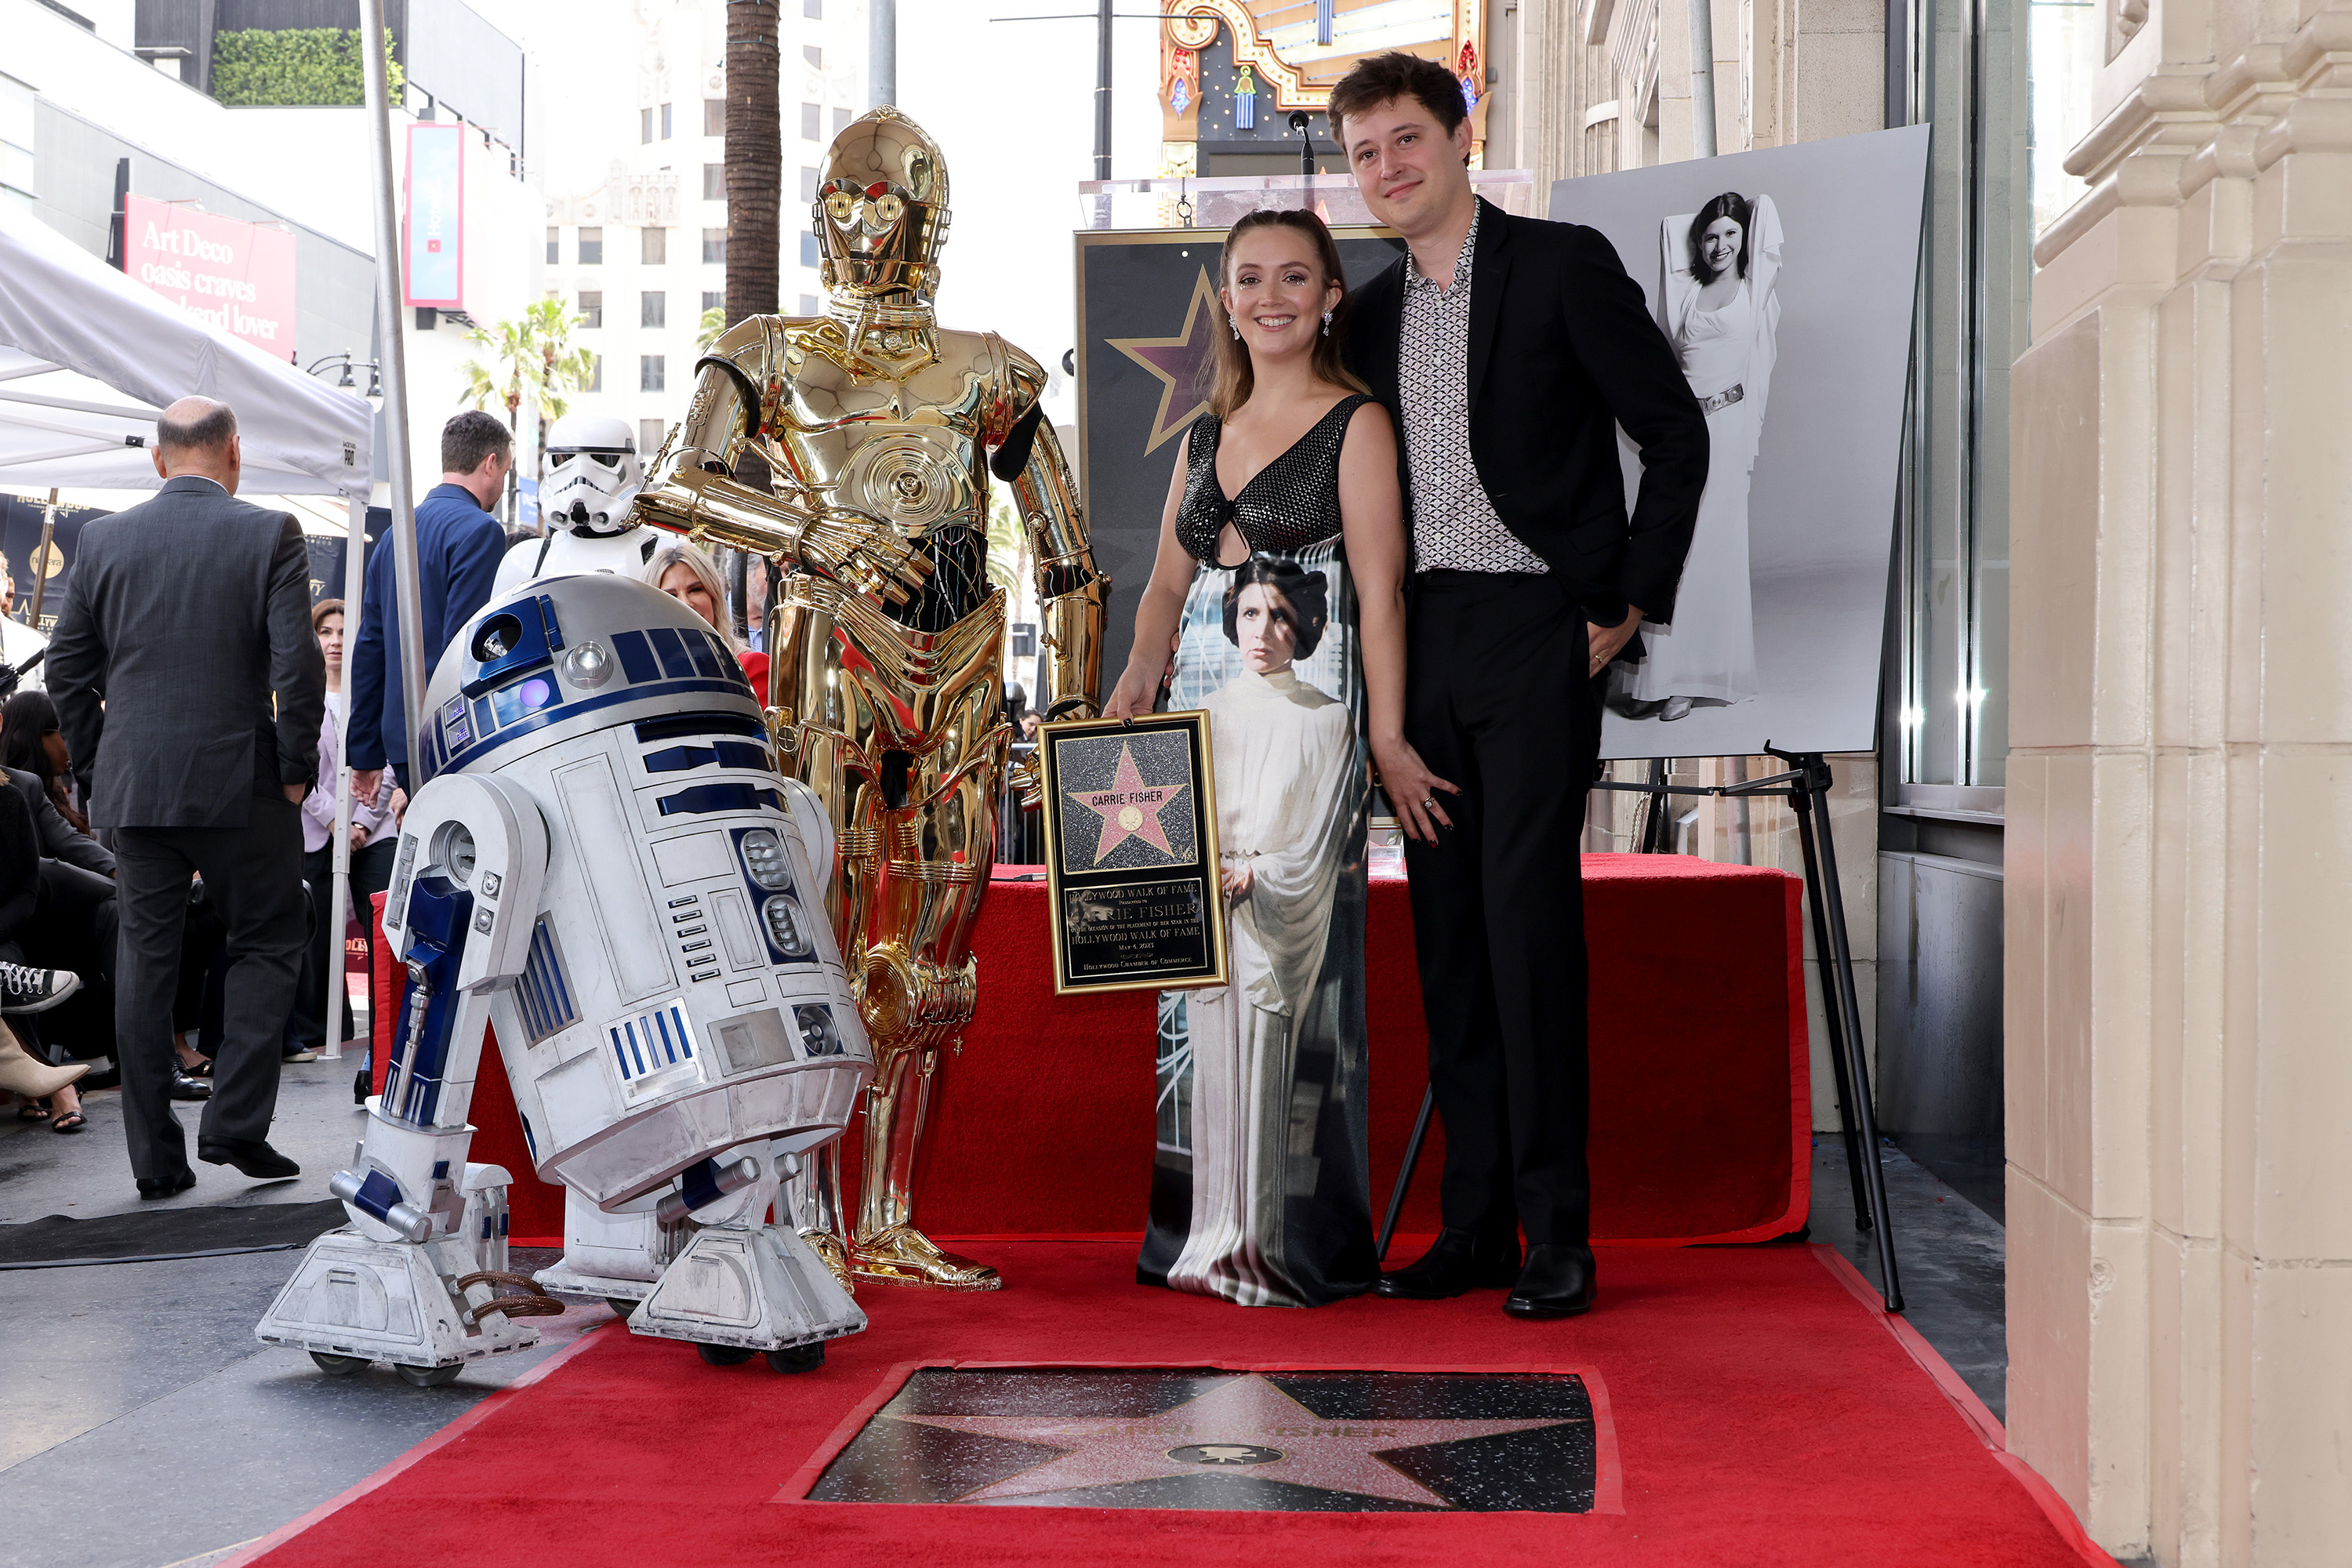 (L-R) Billie Lourd and Austen Rydell attend the ceremony for Carrie Fisher being honored posthumously with a star on the Hollywood Walk of Fame on May 04, 2023, in Hollywood, Calif.